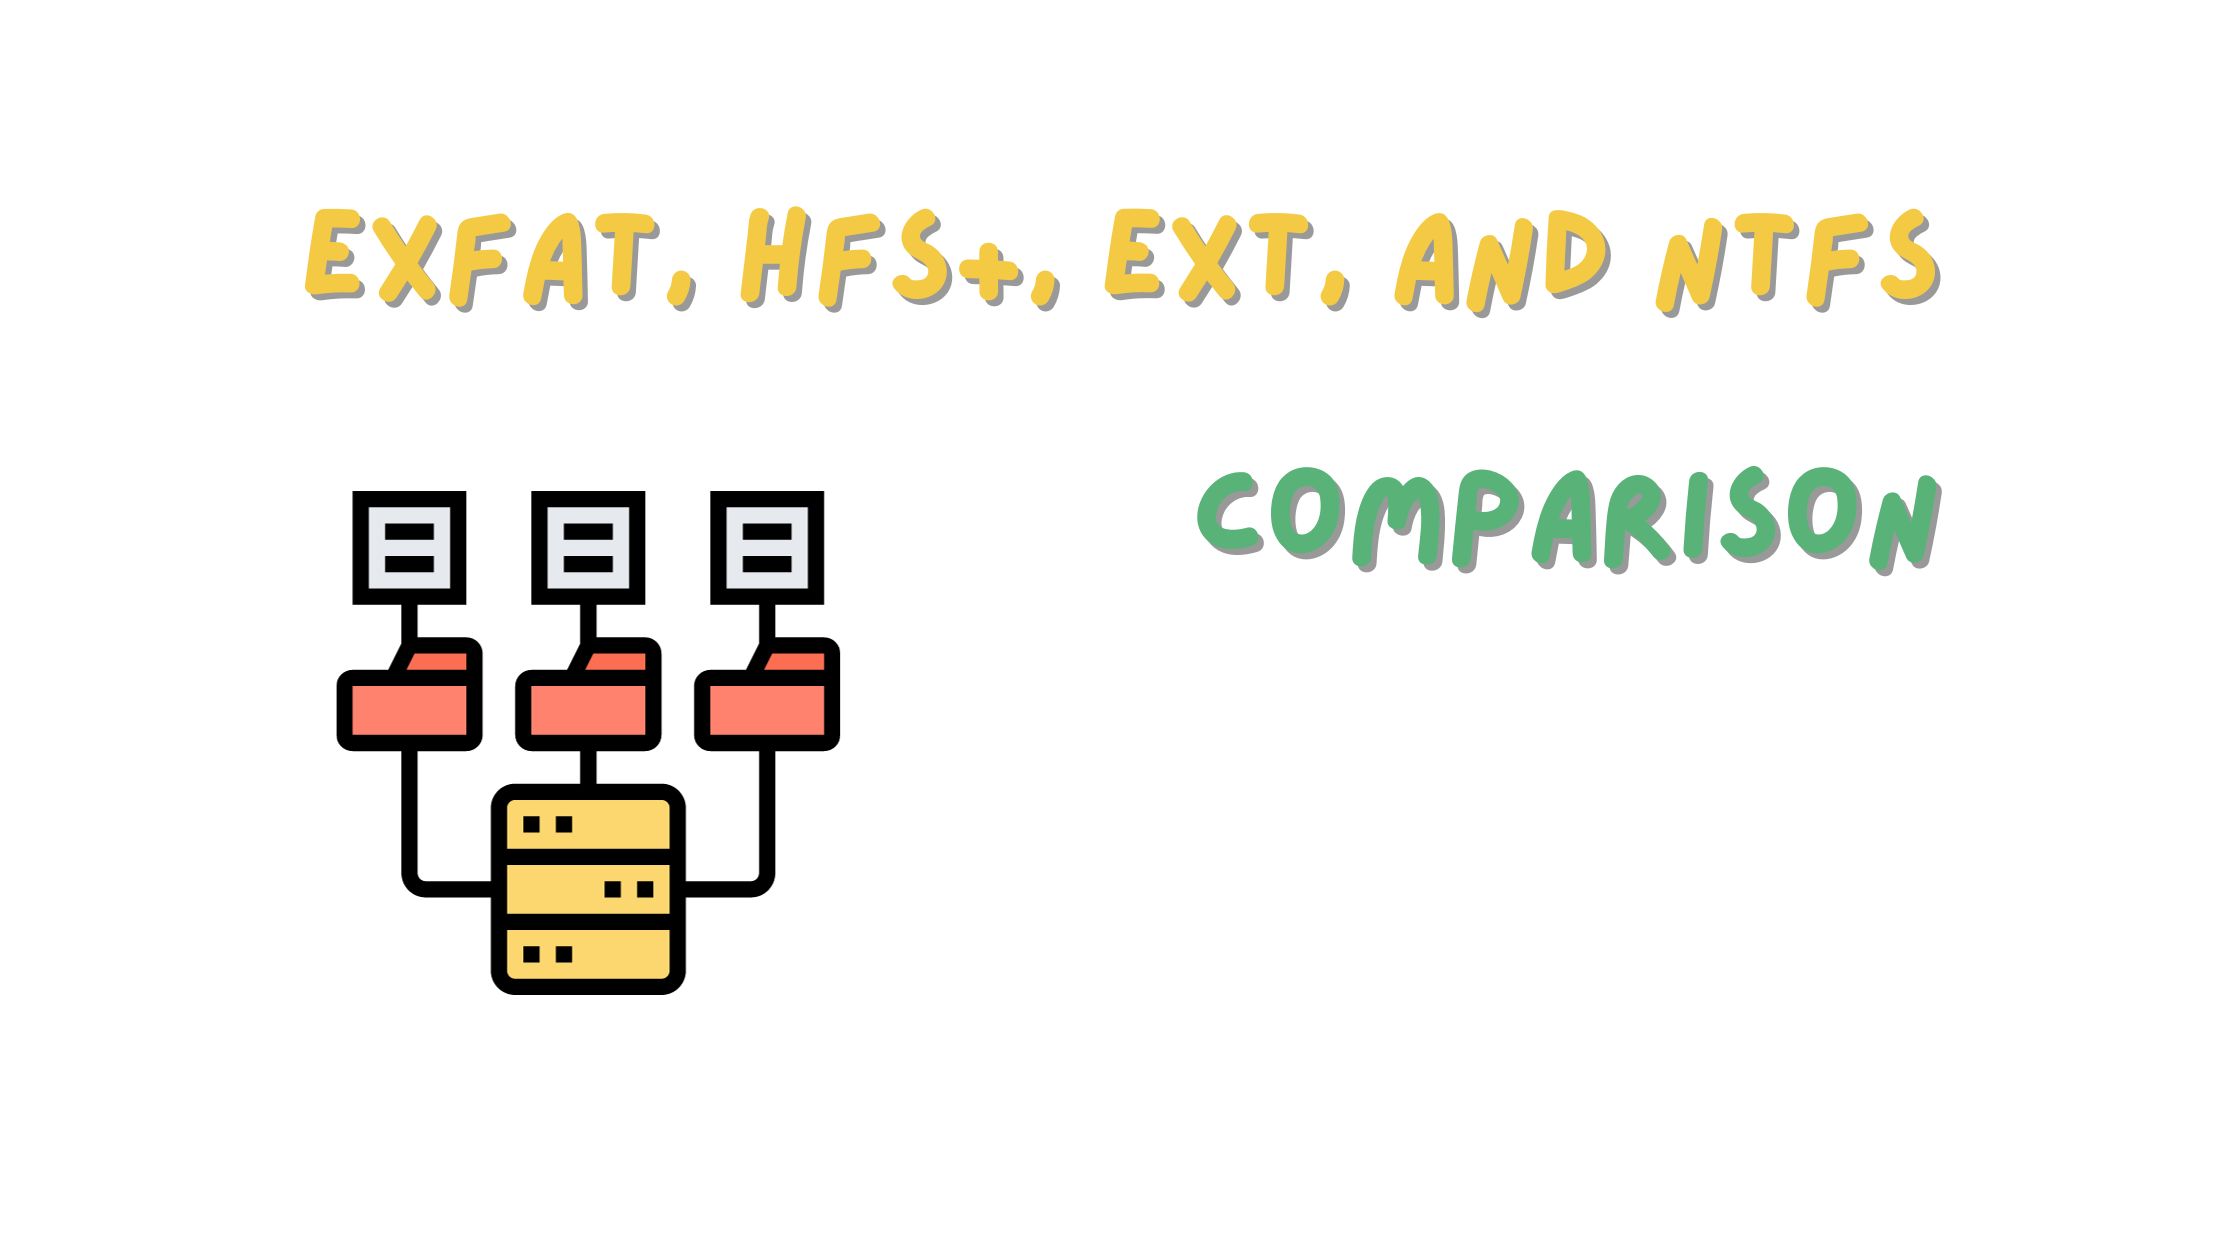 exFAT, HFS+, EXT, and NTFS File Systems: A Comparison